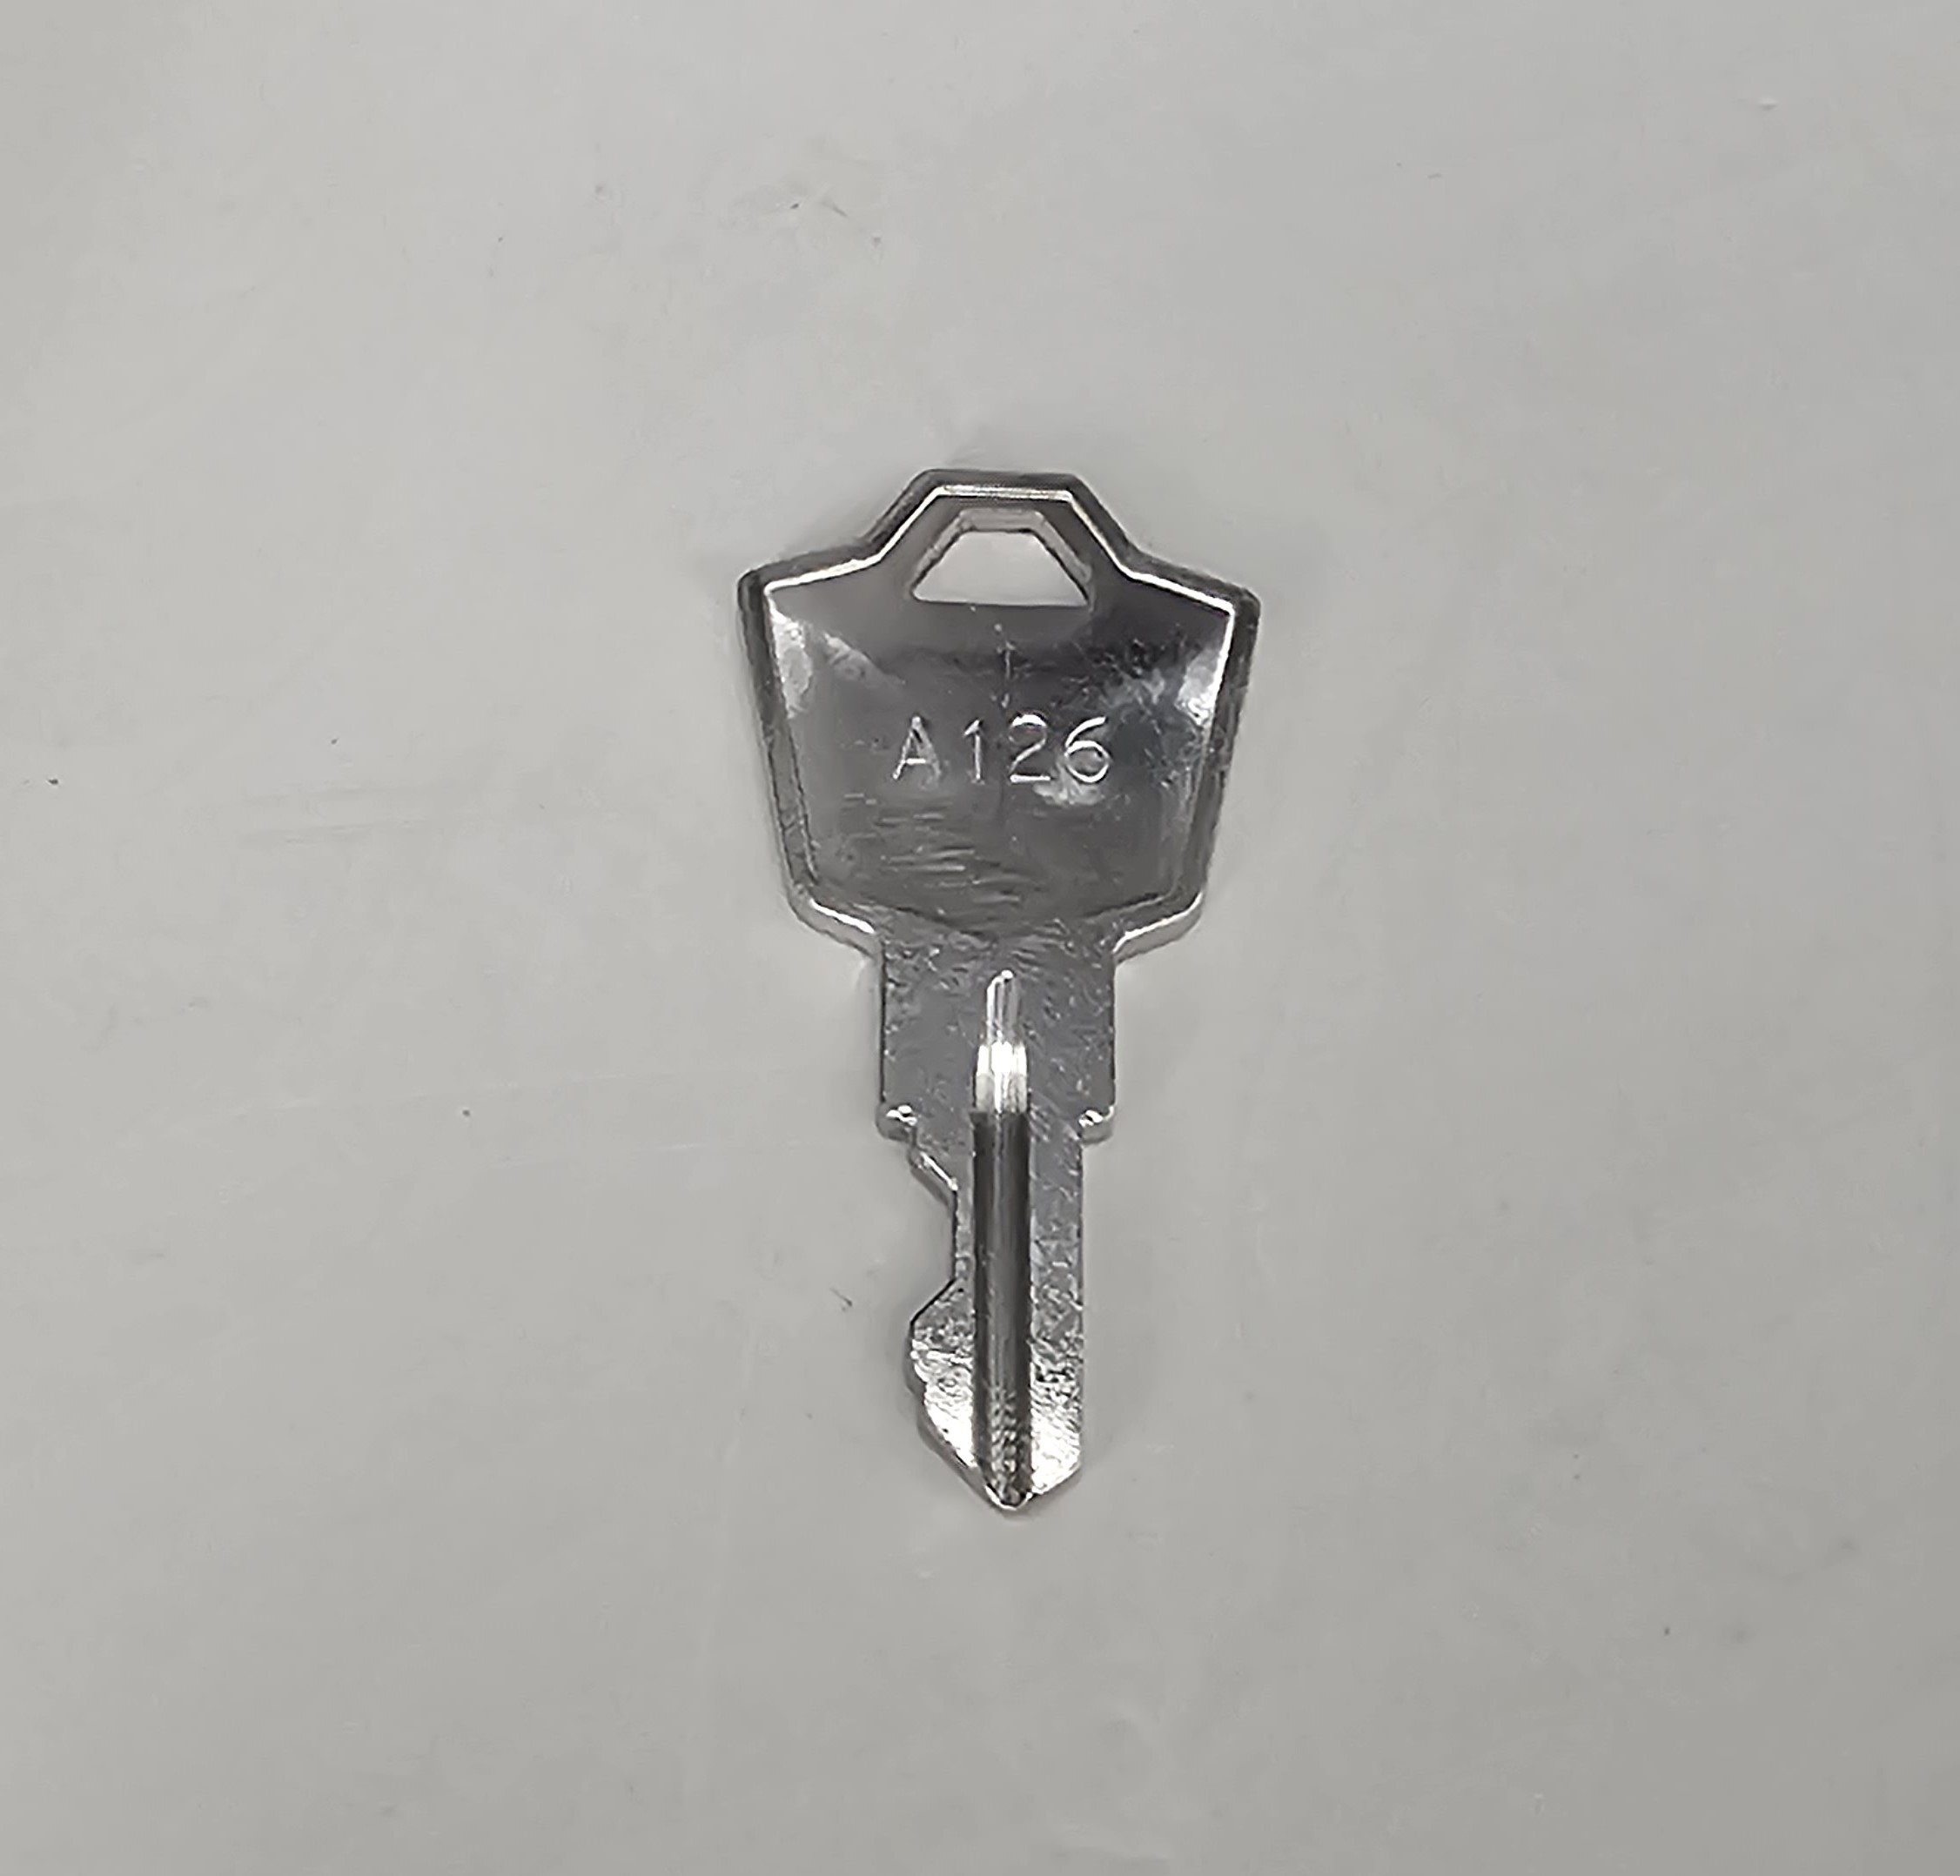 Stanley 2 Position Key Only Image